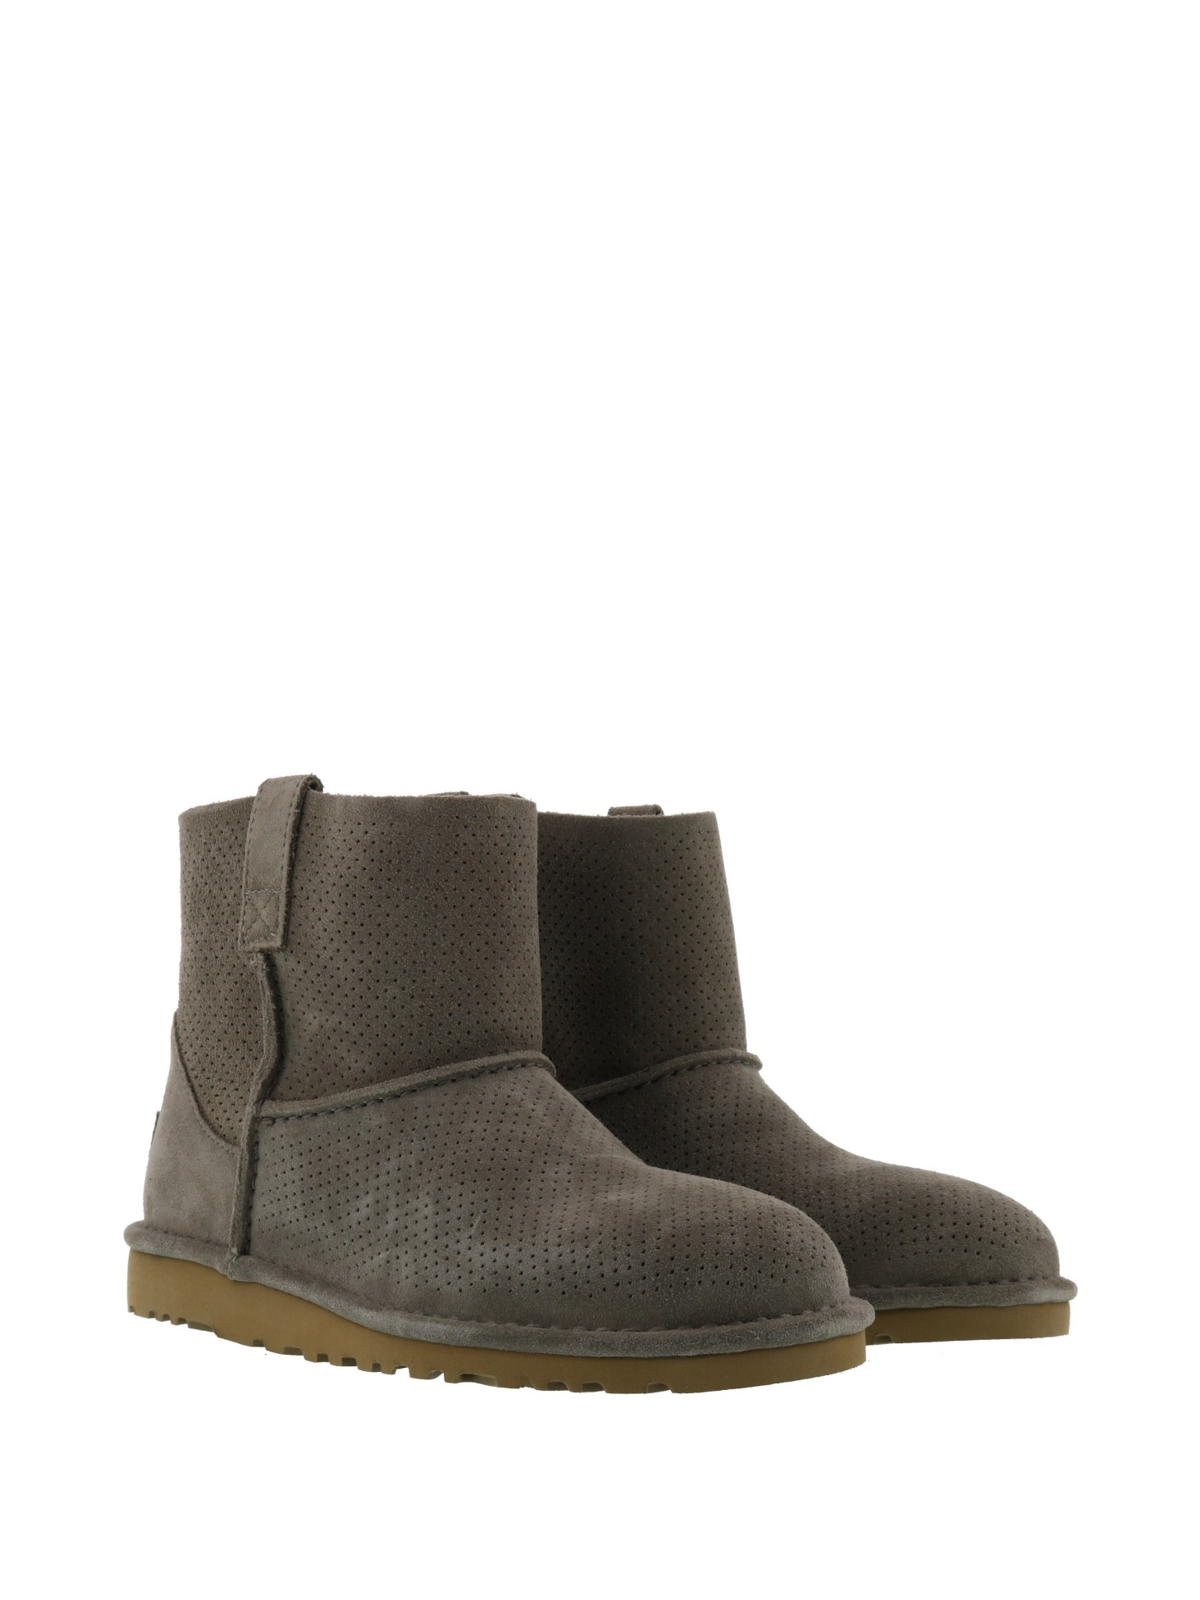 ugg boots taupe